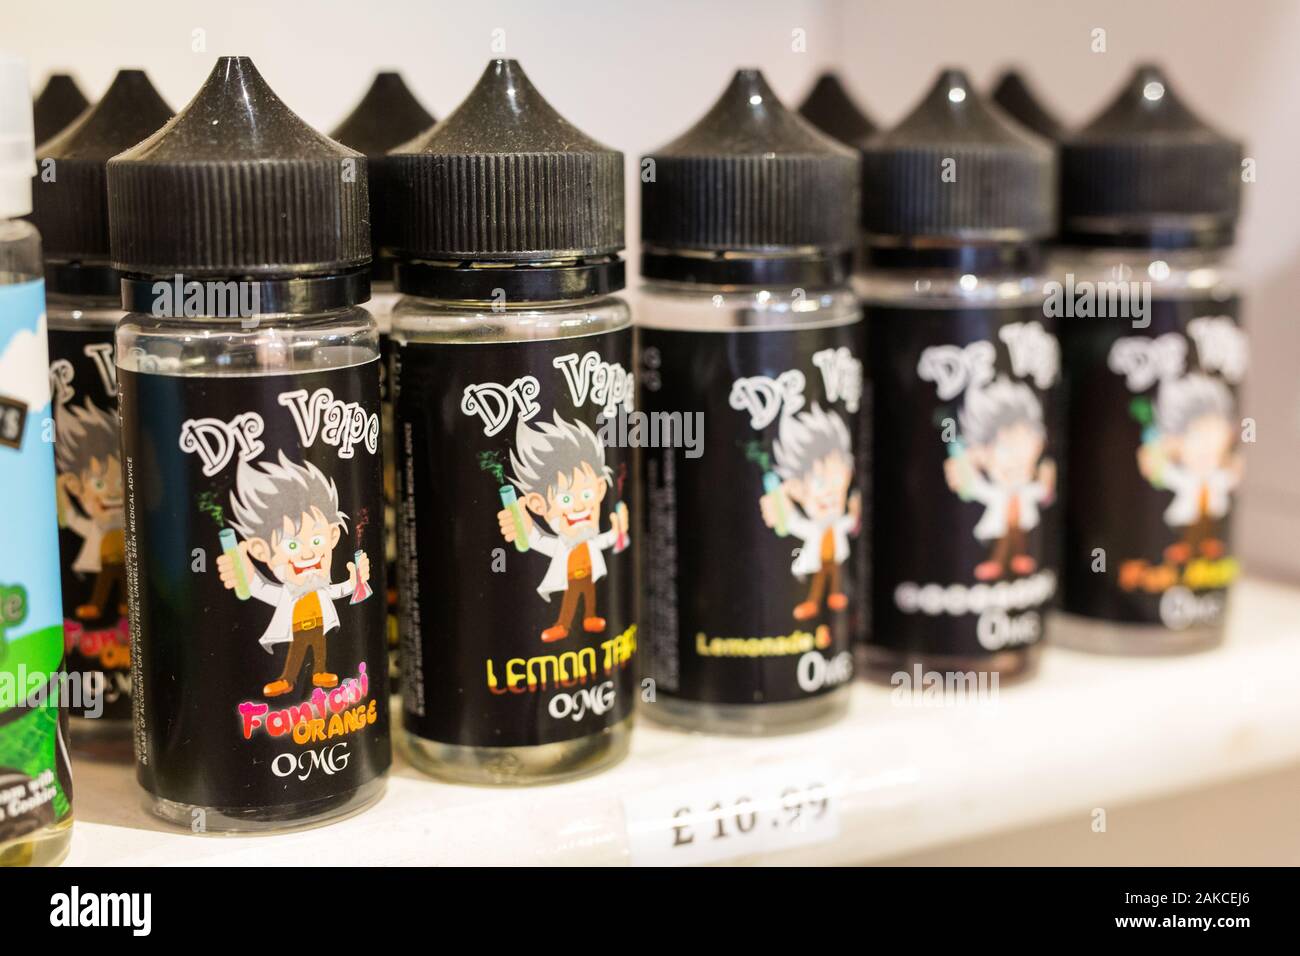 Suffolk, UK May 18 2019; New e-cigarette flavours on display for sale in a vape shop Stock Photo